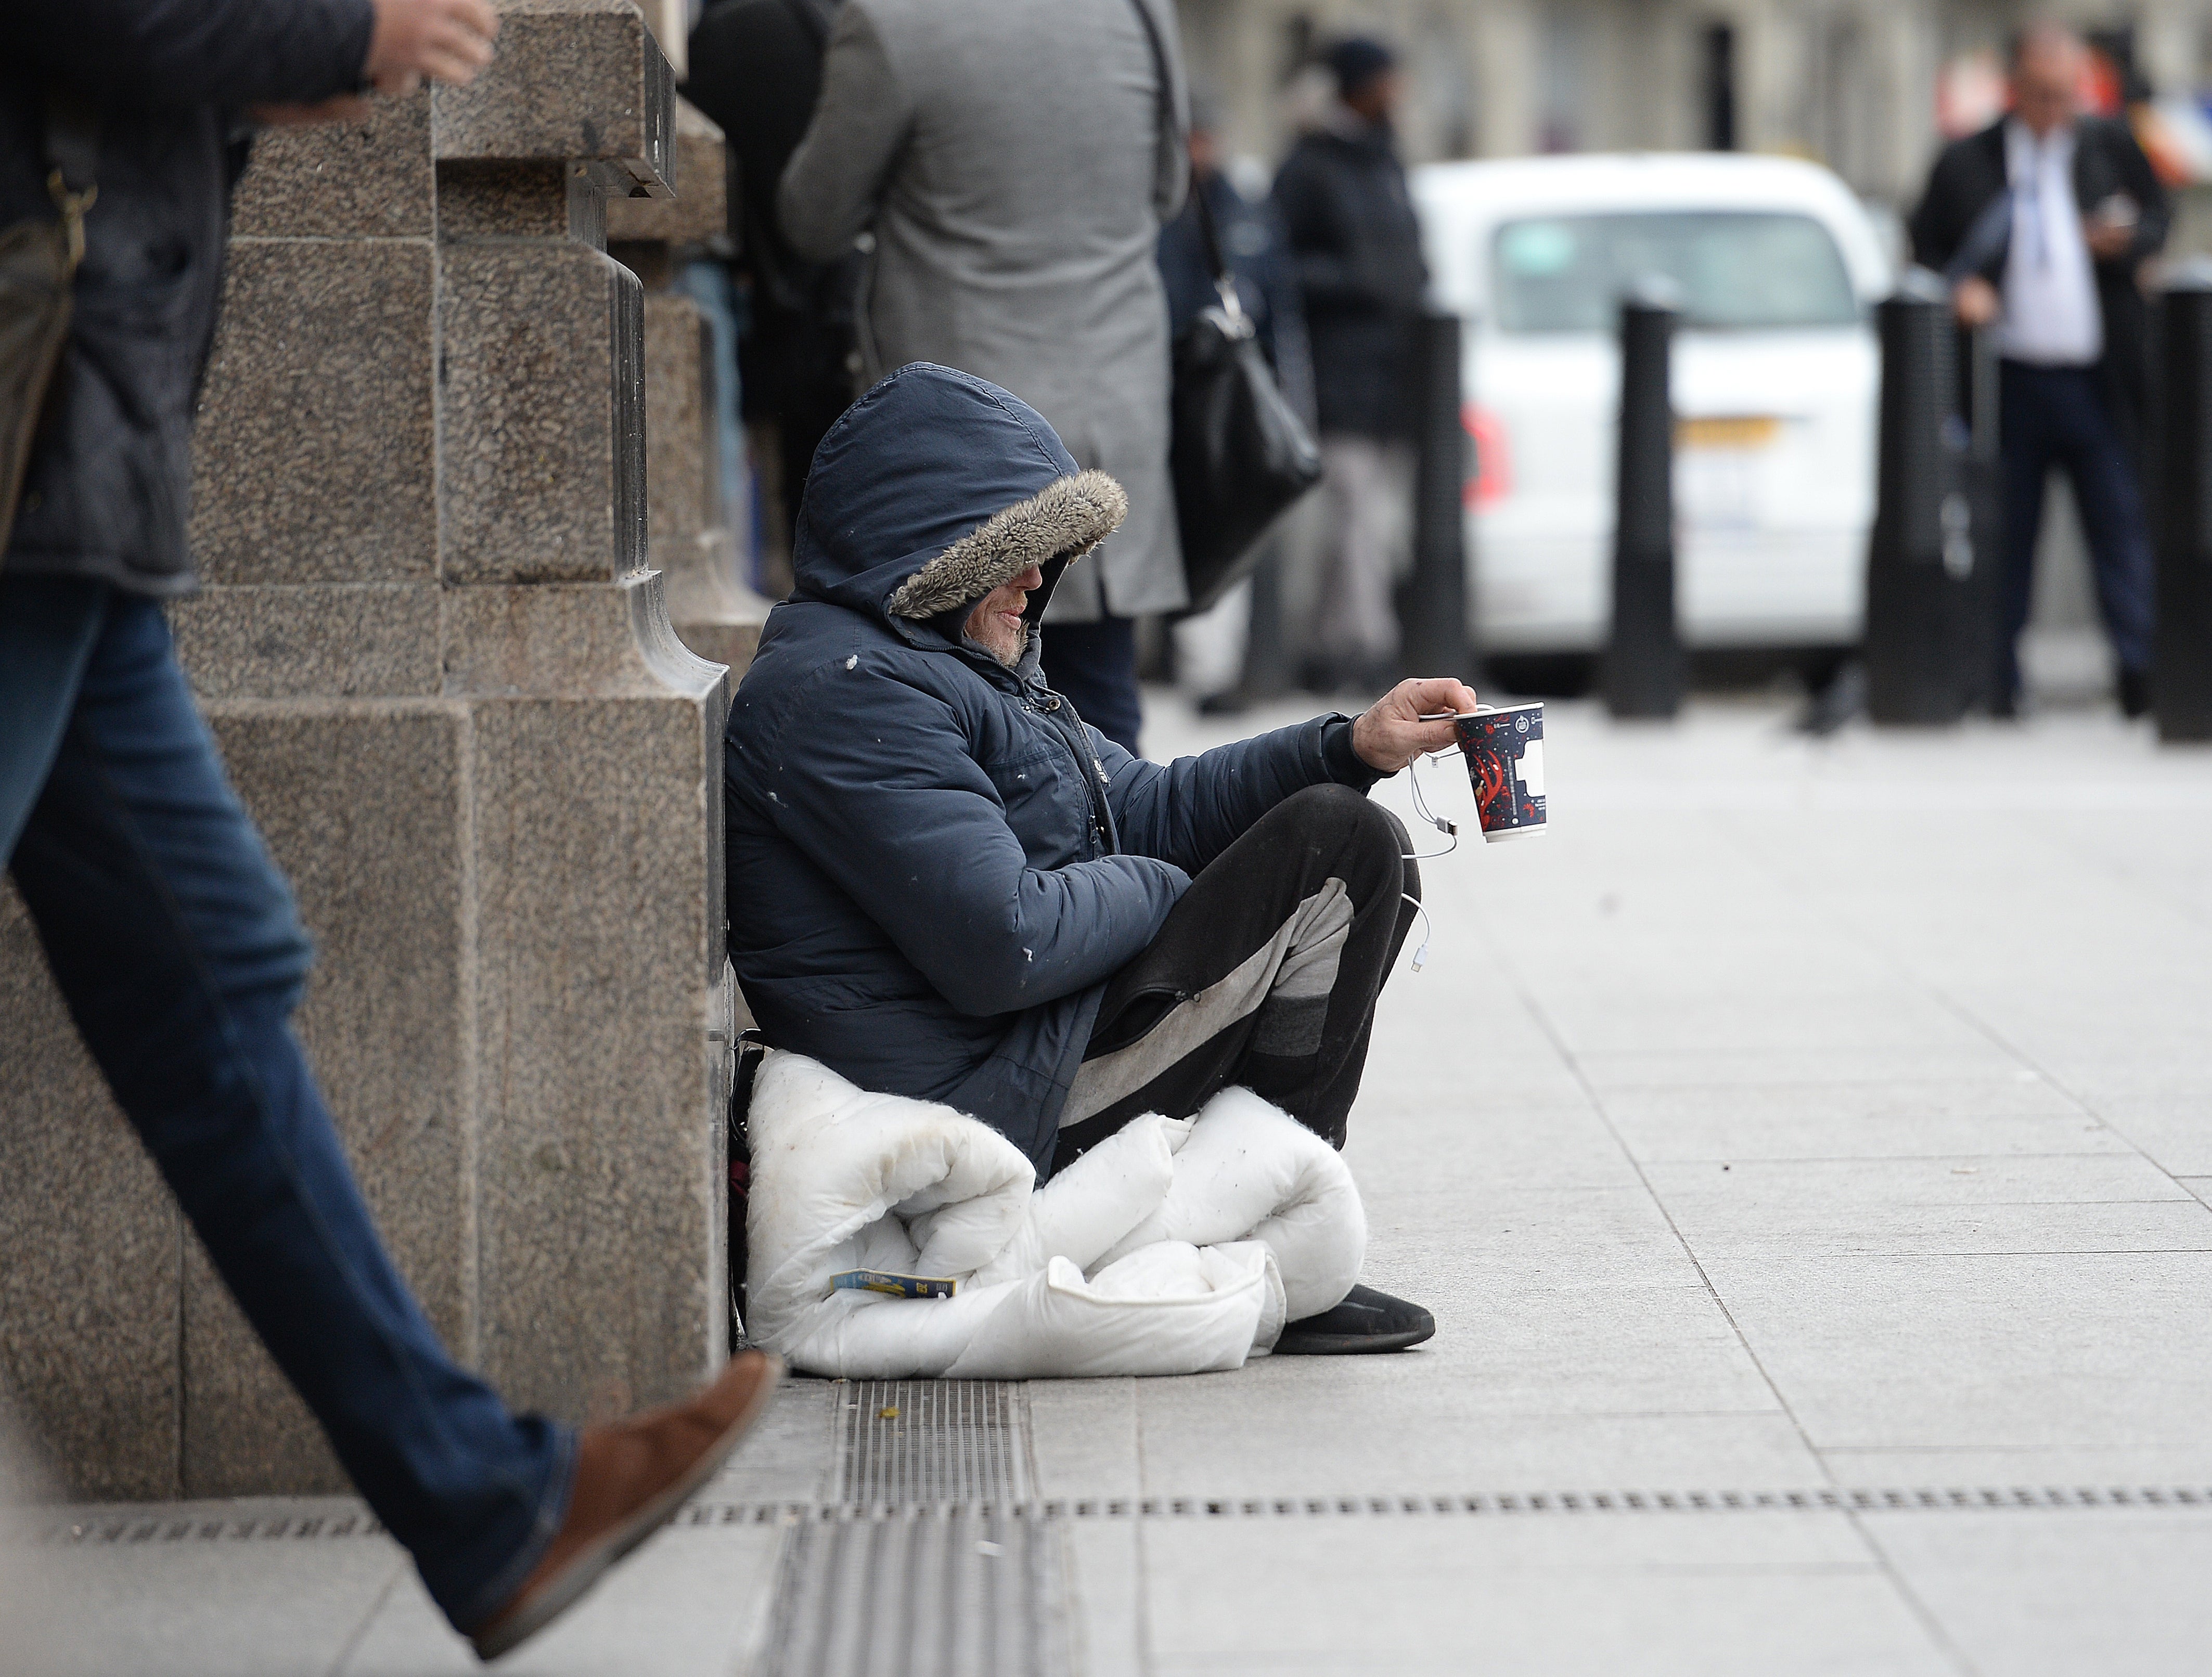 The government has announced new powers enabling police and local authorities to order beggars to move on